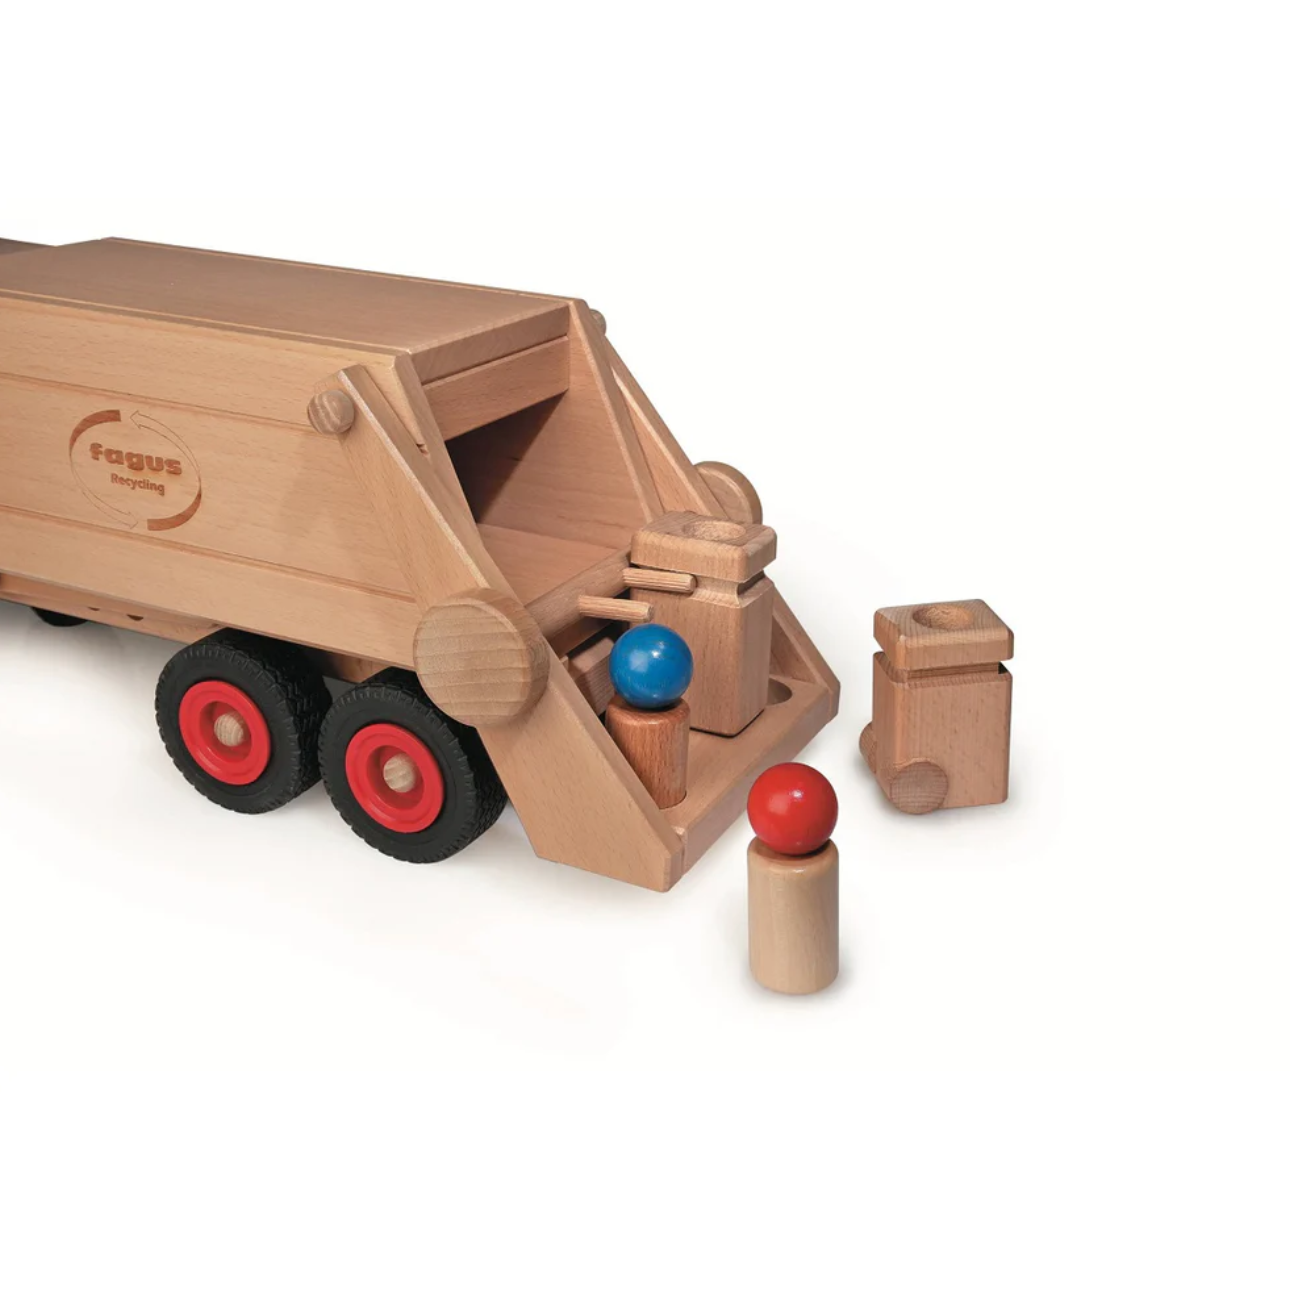 Fagus Recycling/Garbage Truck | Wooden Toy Vehicle